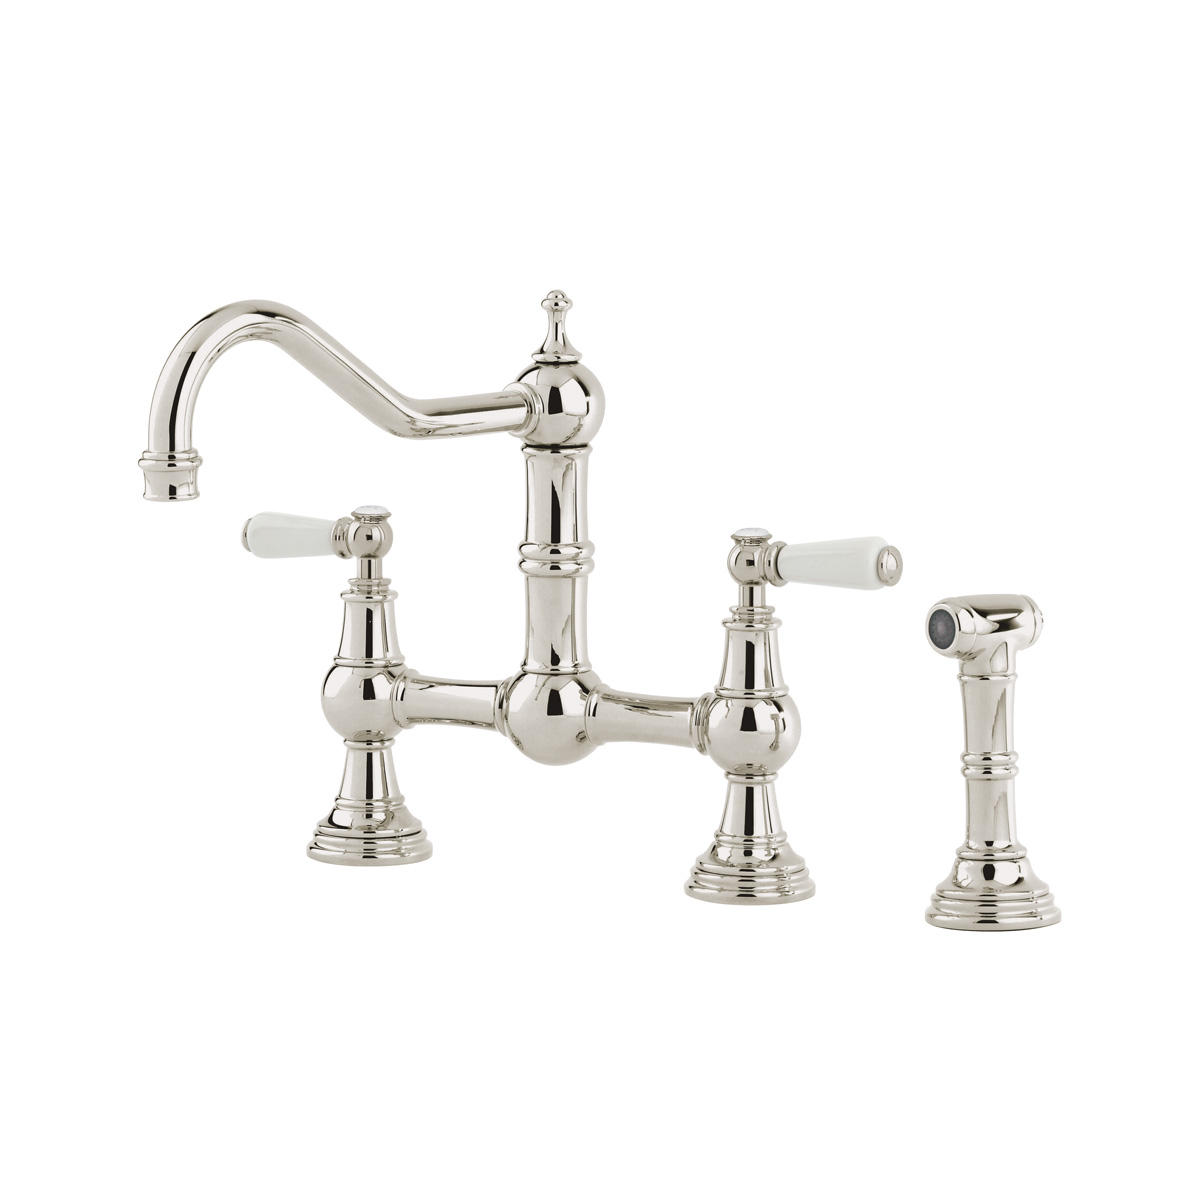 Shaws by Perrin & Rowe Hambleton French bridge mixer with spray rinse in Nickel. Provence style kitchen tap AUSH.4756. Distributed in Australia by Luxe by Design, Brisbane.